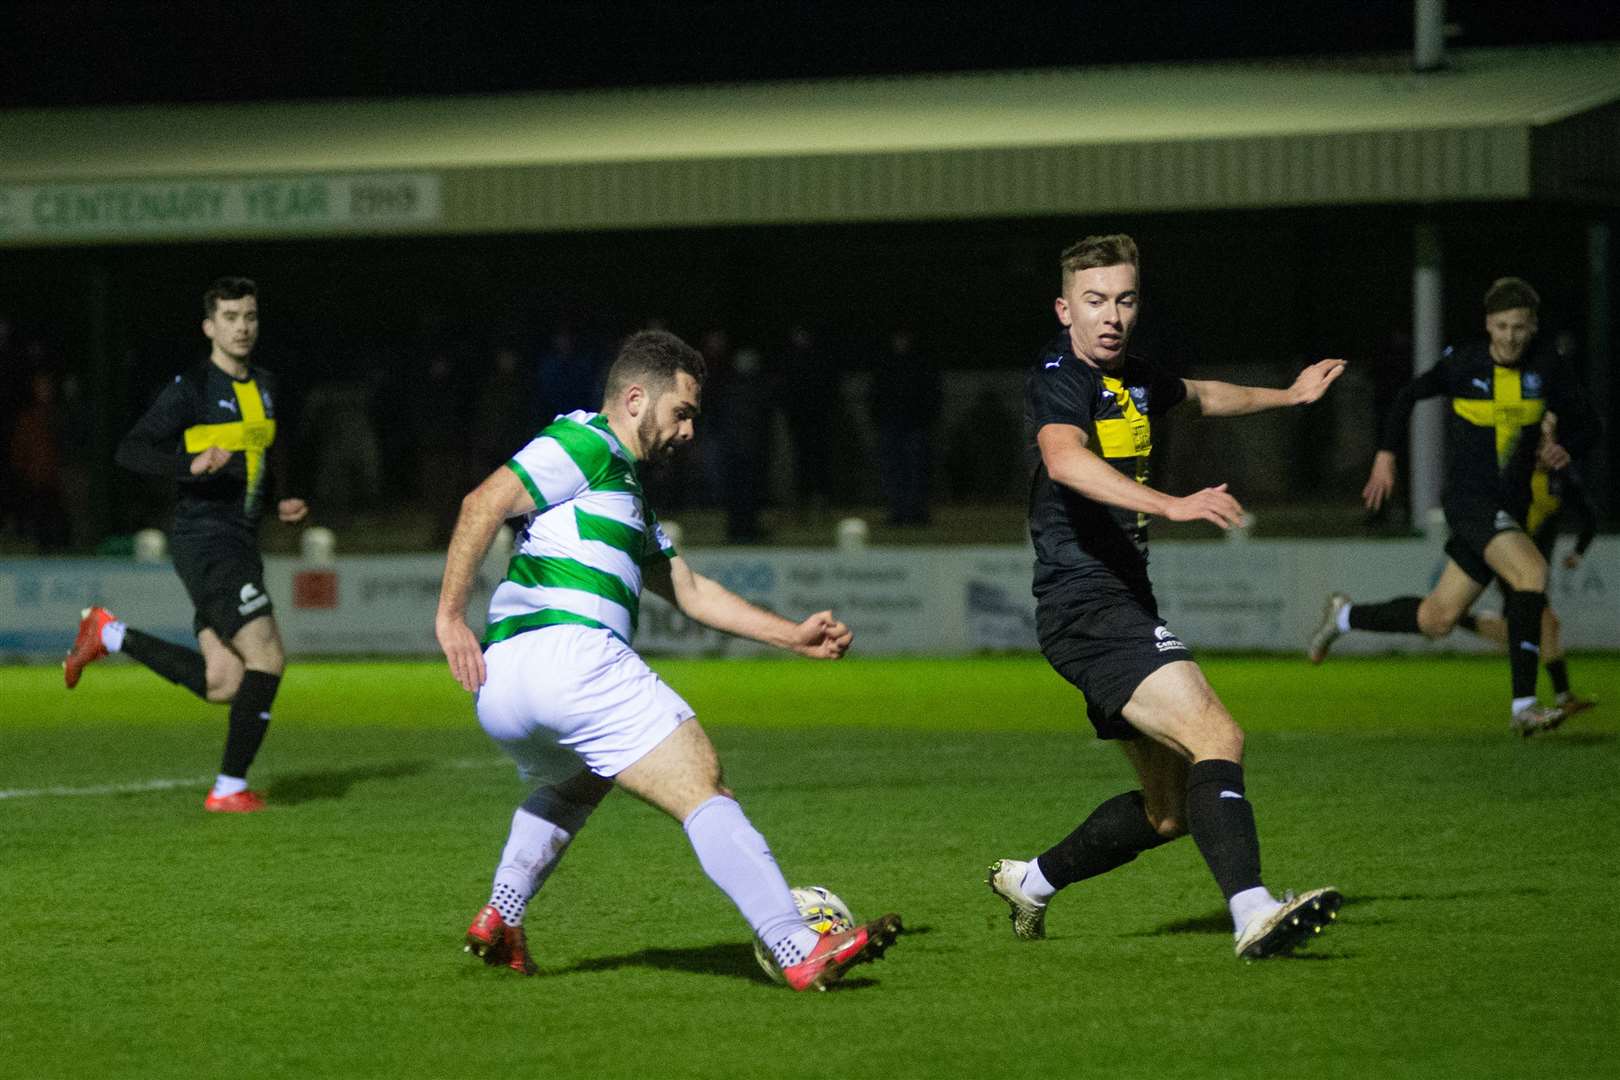 Buckie Thistle's Andy MacAskill twists his way past the Nairn defence in the lead-up to his goal. Picture: Daniel Forsyth..